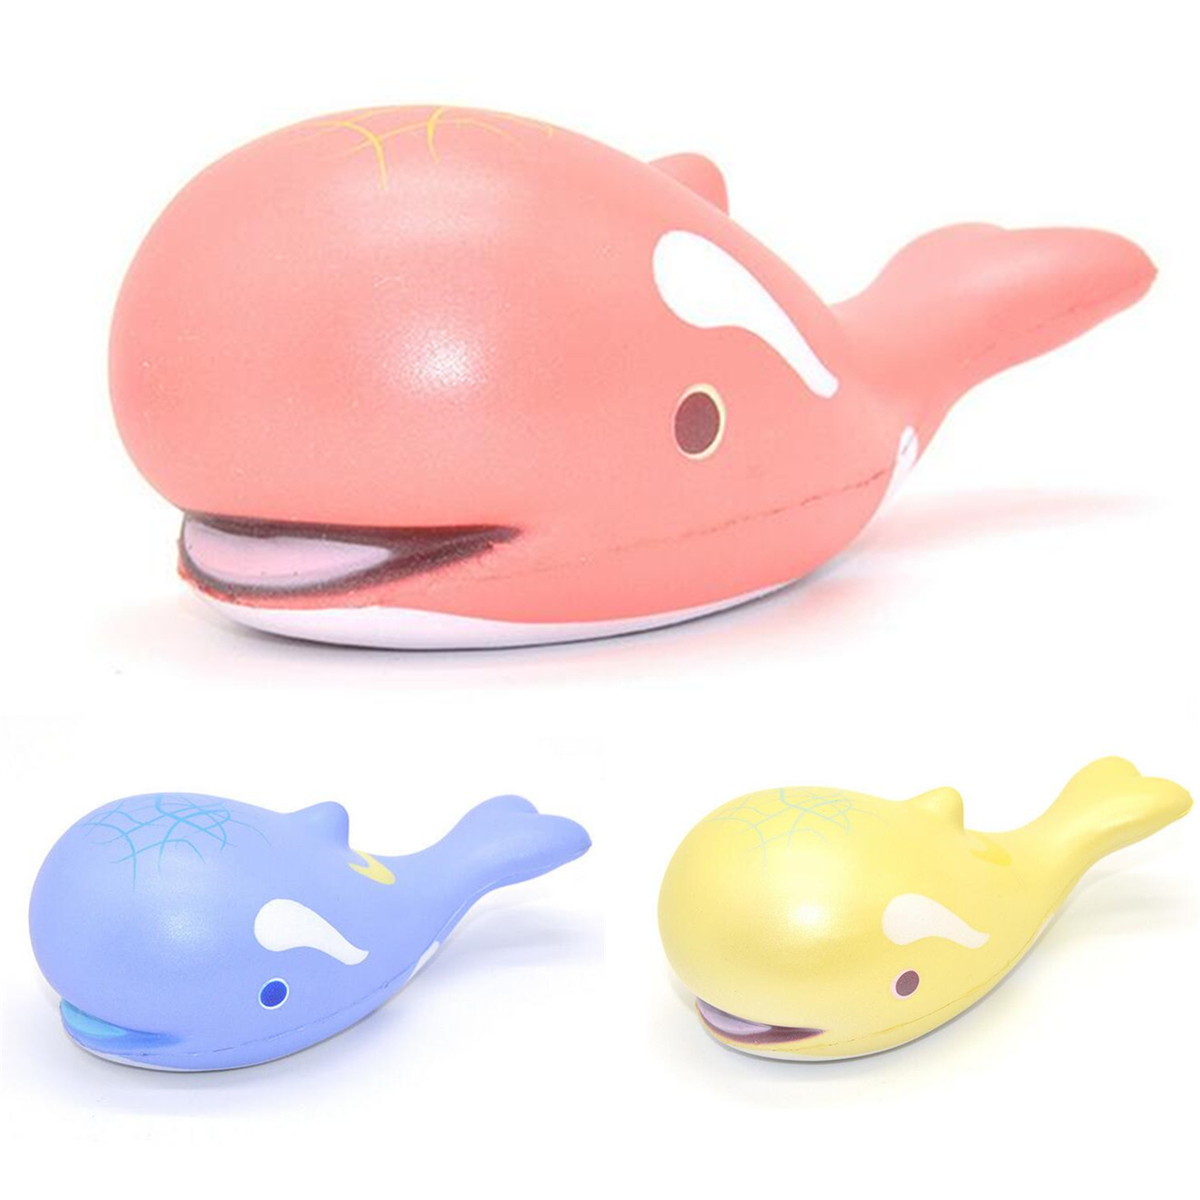 15cm-Whale-Squishy-Slow-Rising-Pressure-Release-Soft-Toy-With-Keychains-for-Iphone-Samsung-Xiaomi-1145805-1